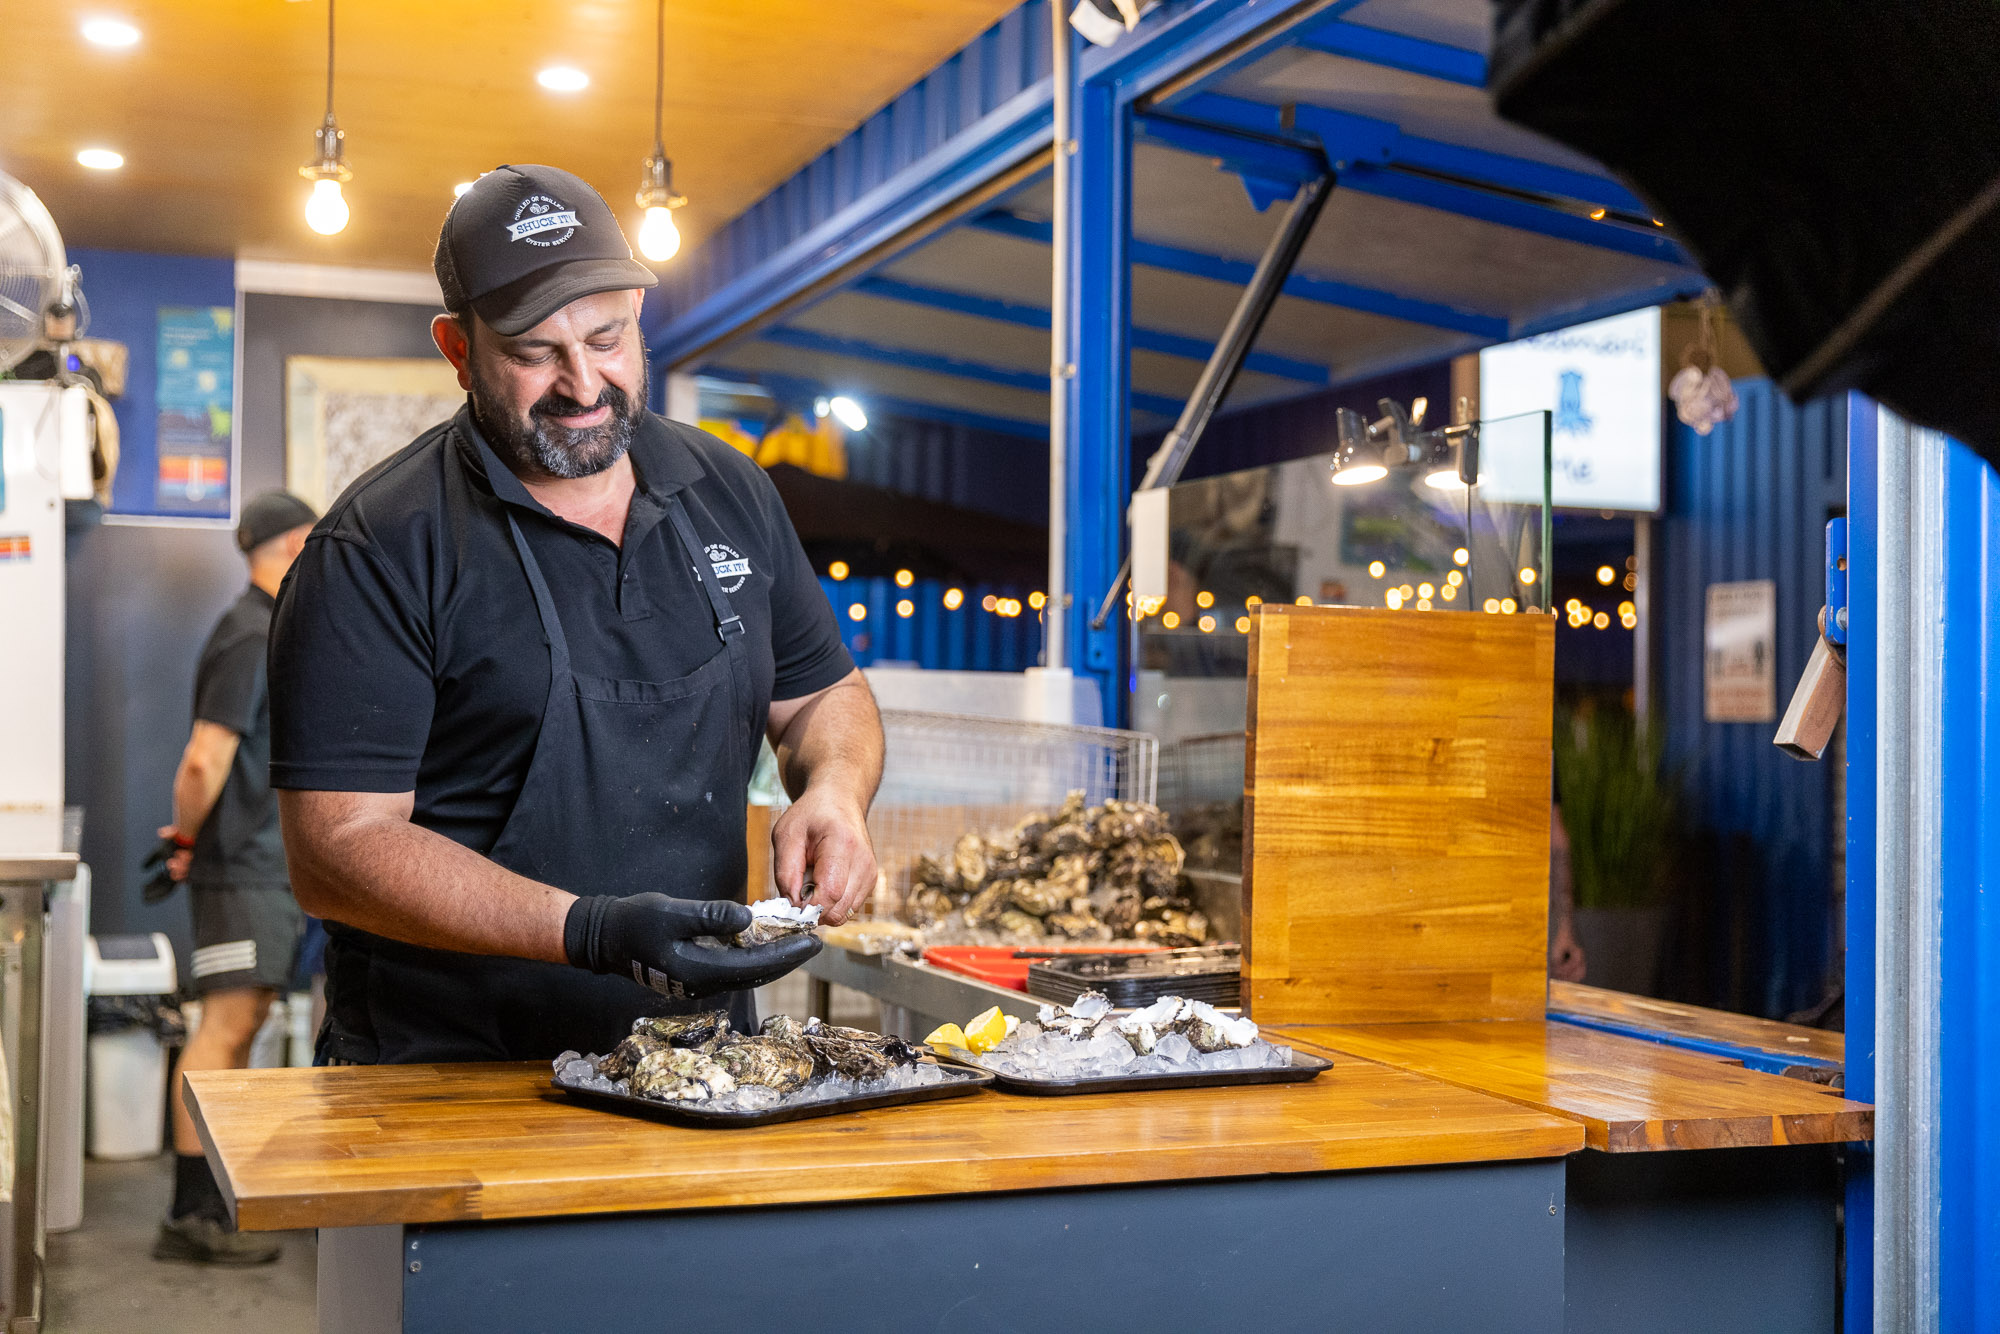 An image of chef shucking oysters.